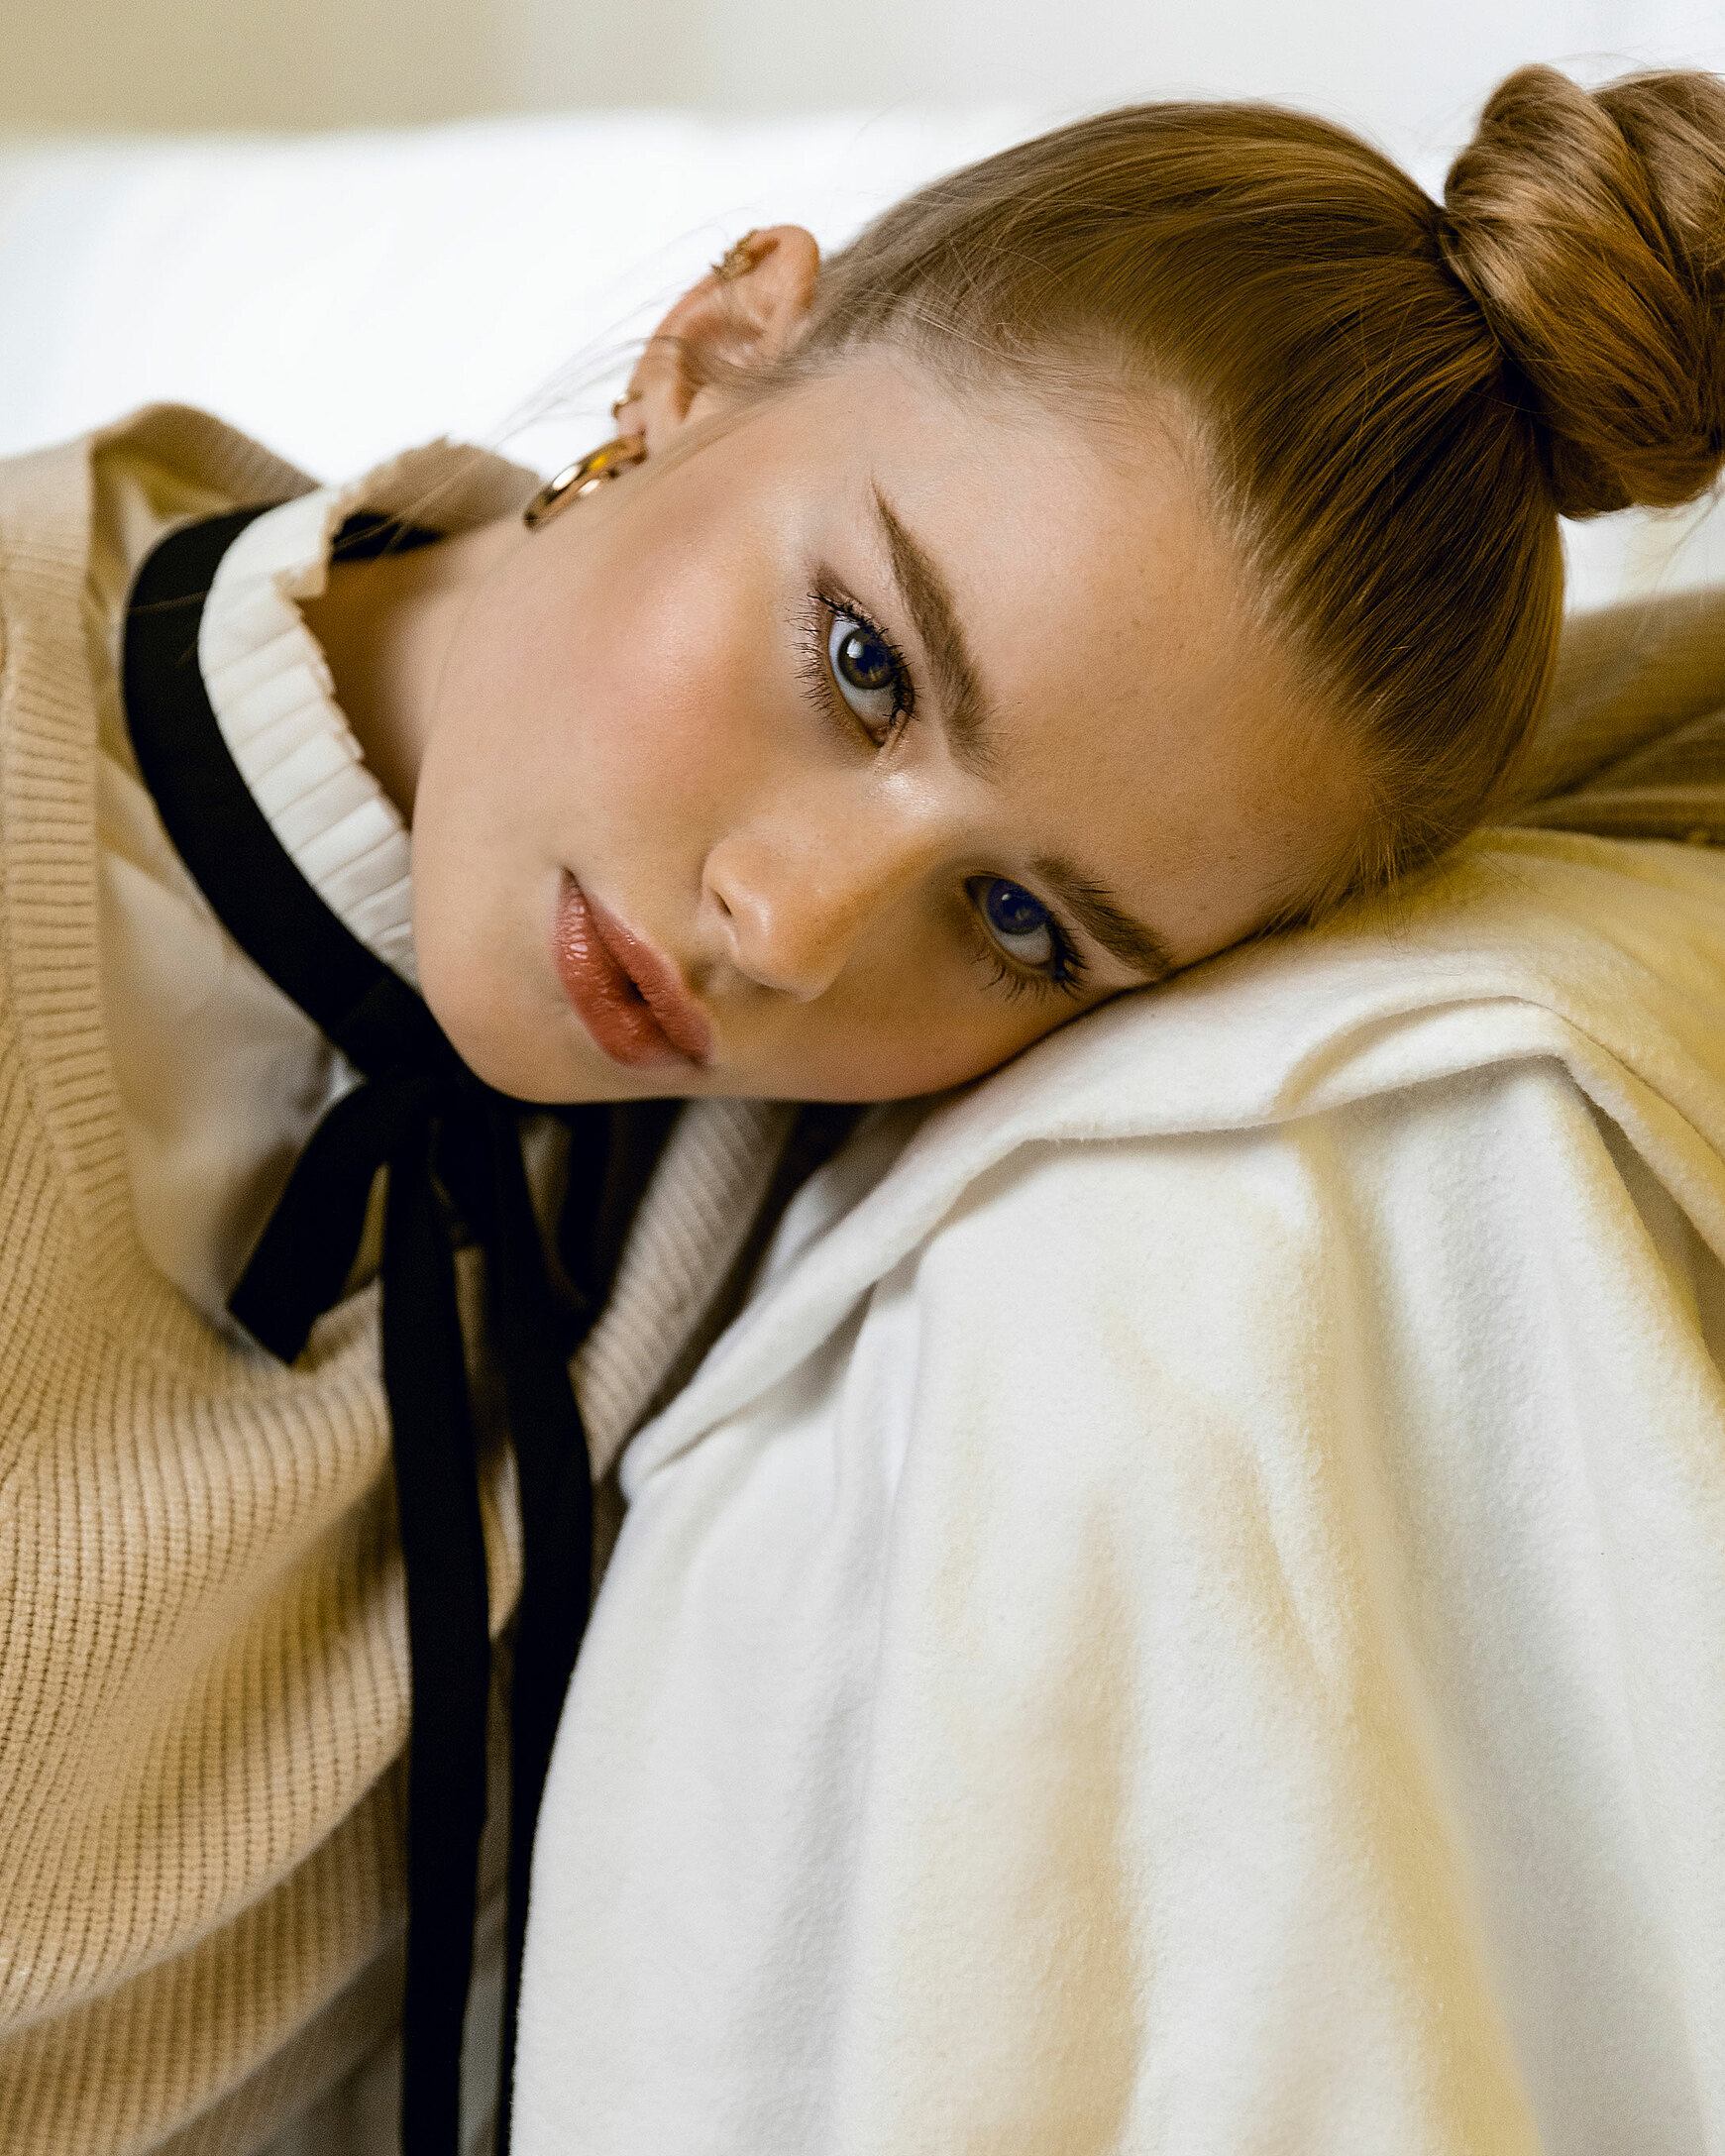 A female blonde model lean against a chair. It is a close up portrait in a beige pullover with a small black bow.